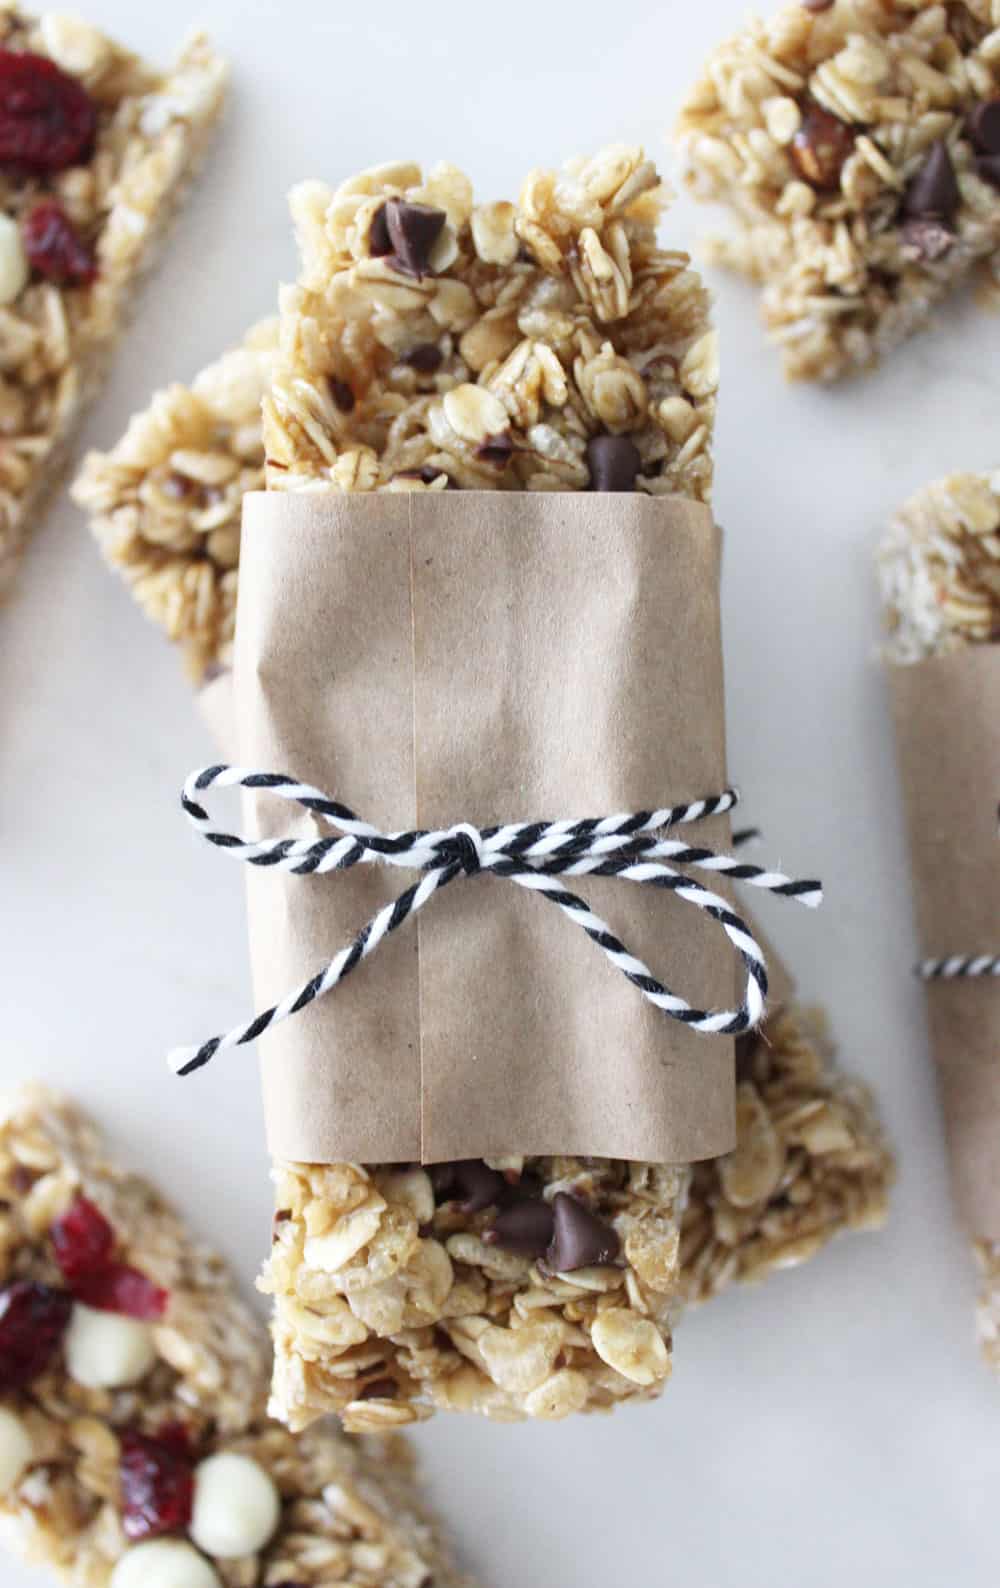 homemade granola bars stacked on each other wrapped in paper and twine